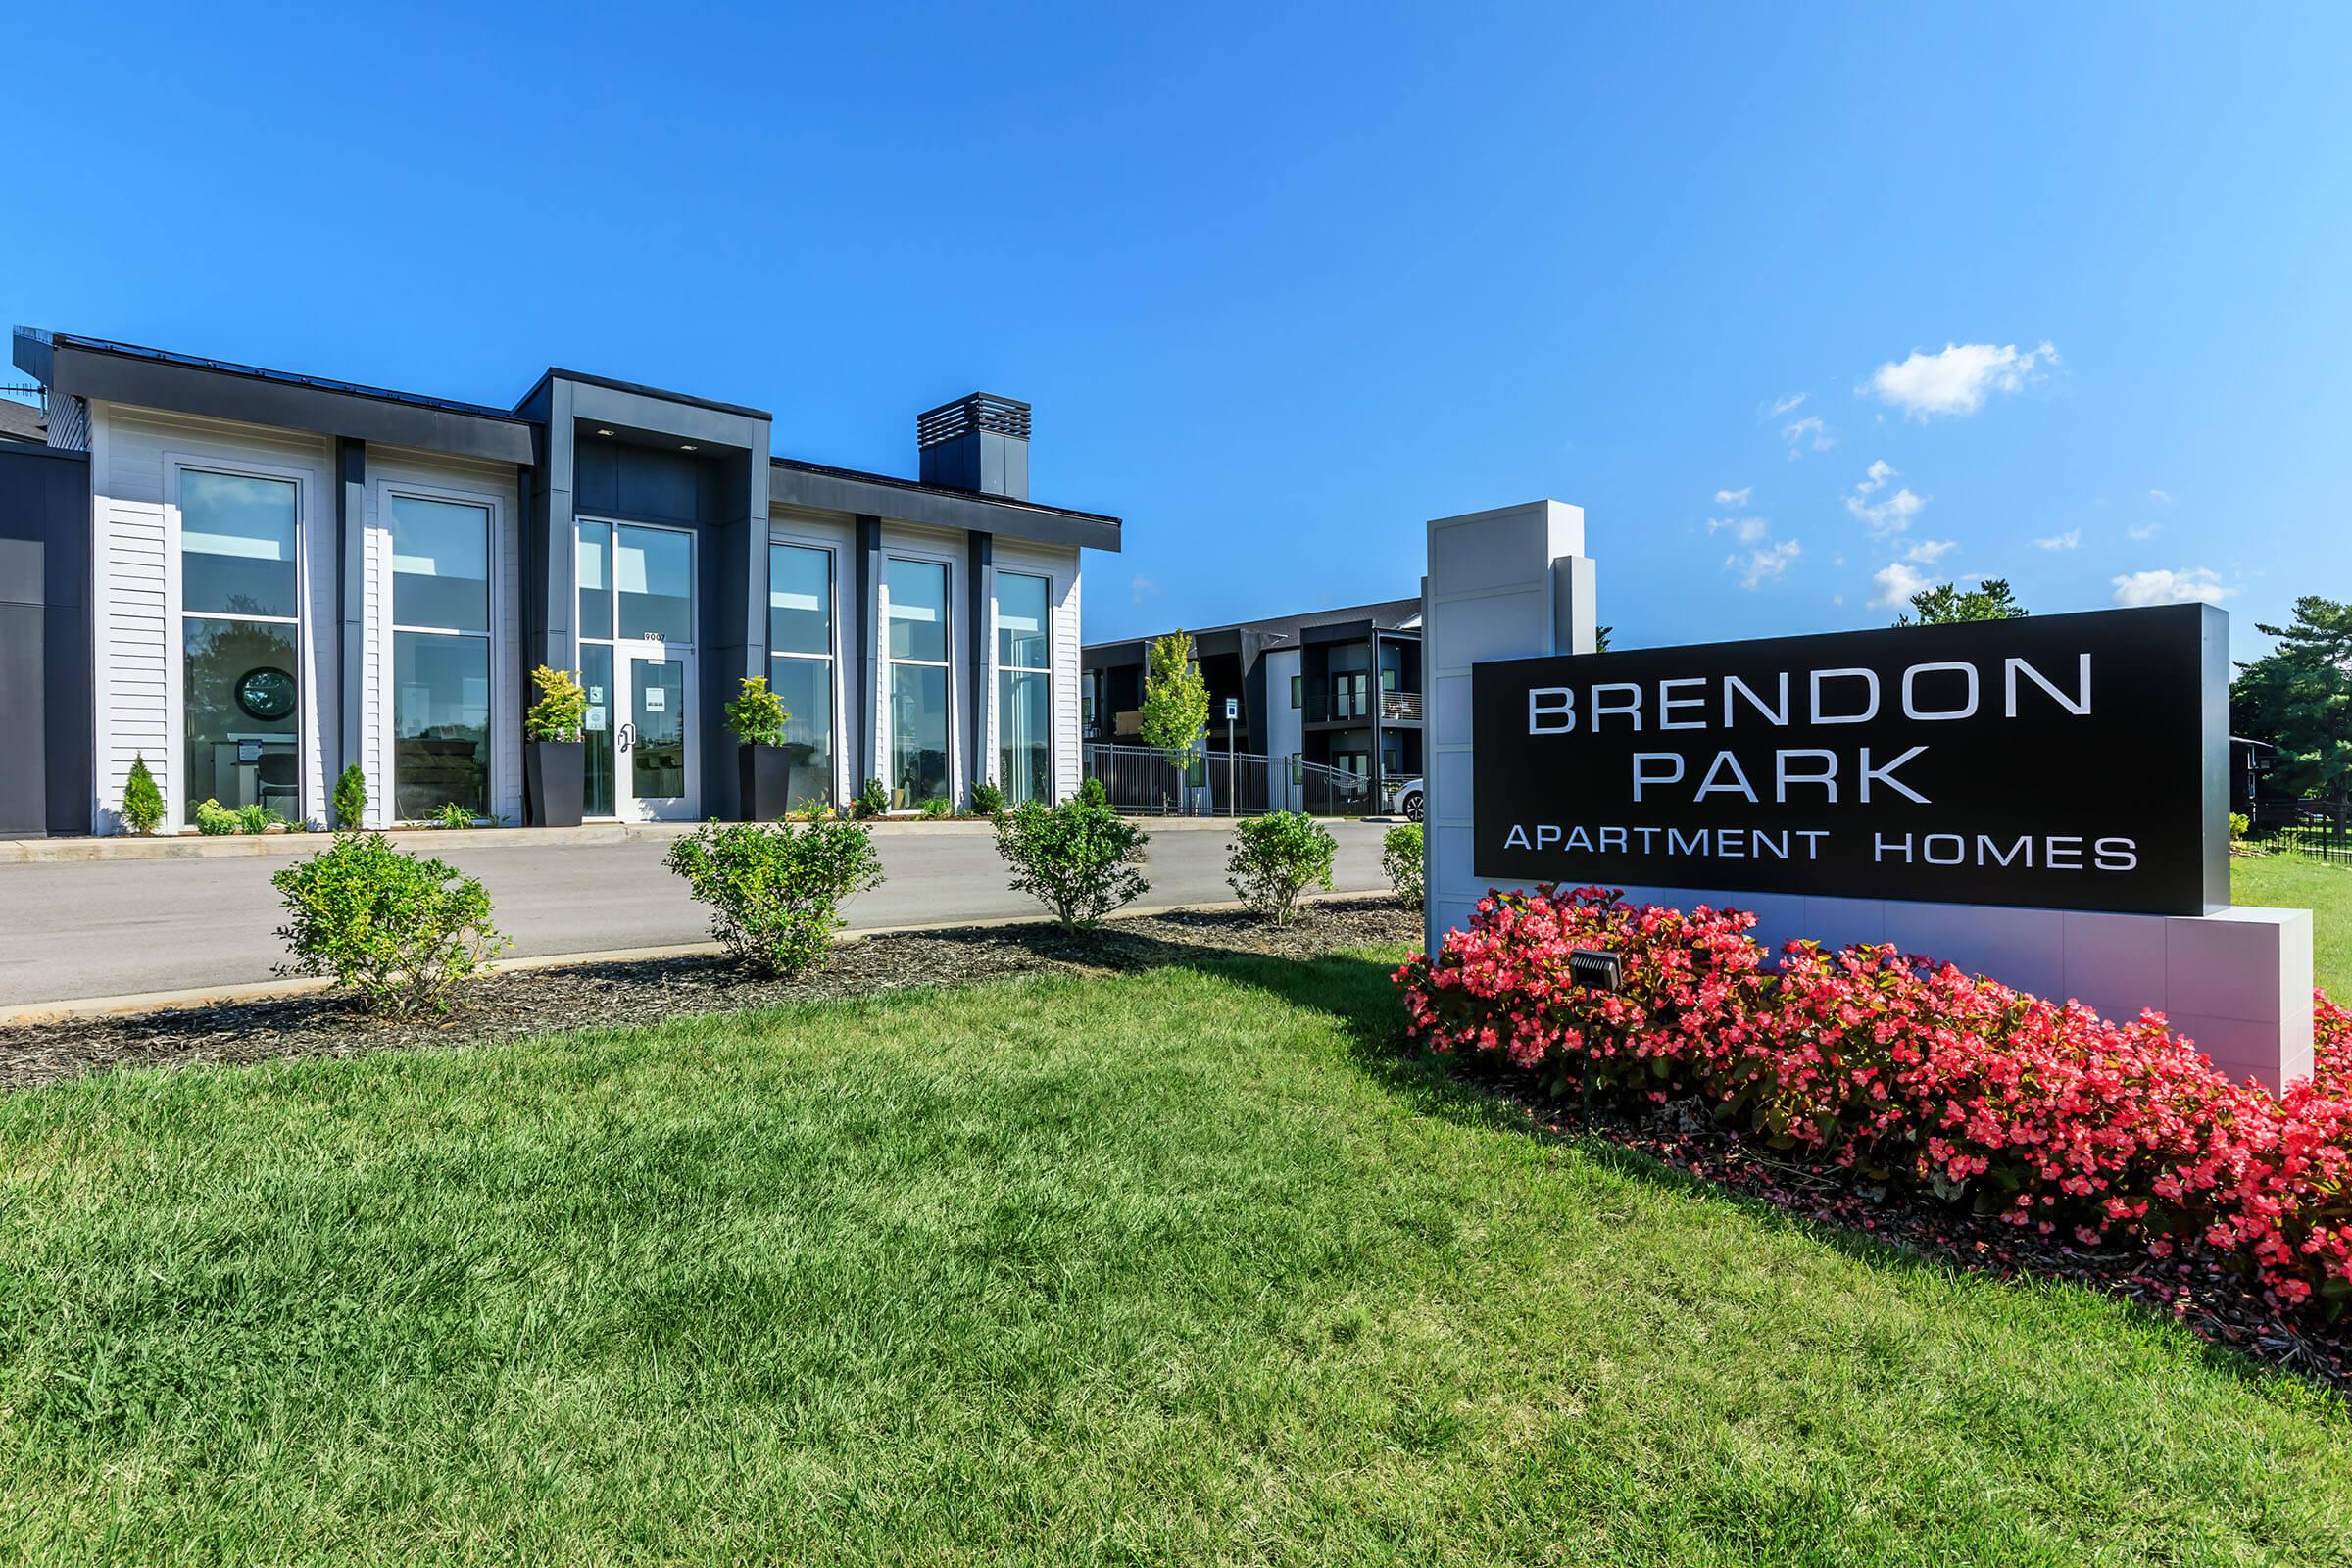 Your New Home Awaits You at Brendon Park Apartments